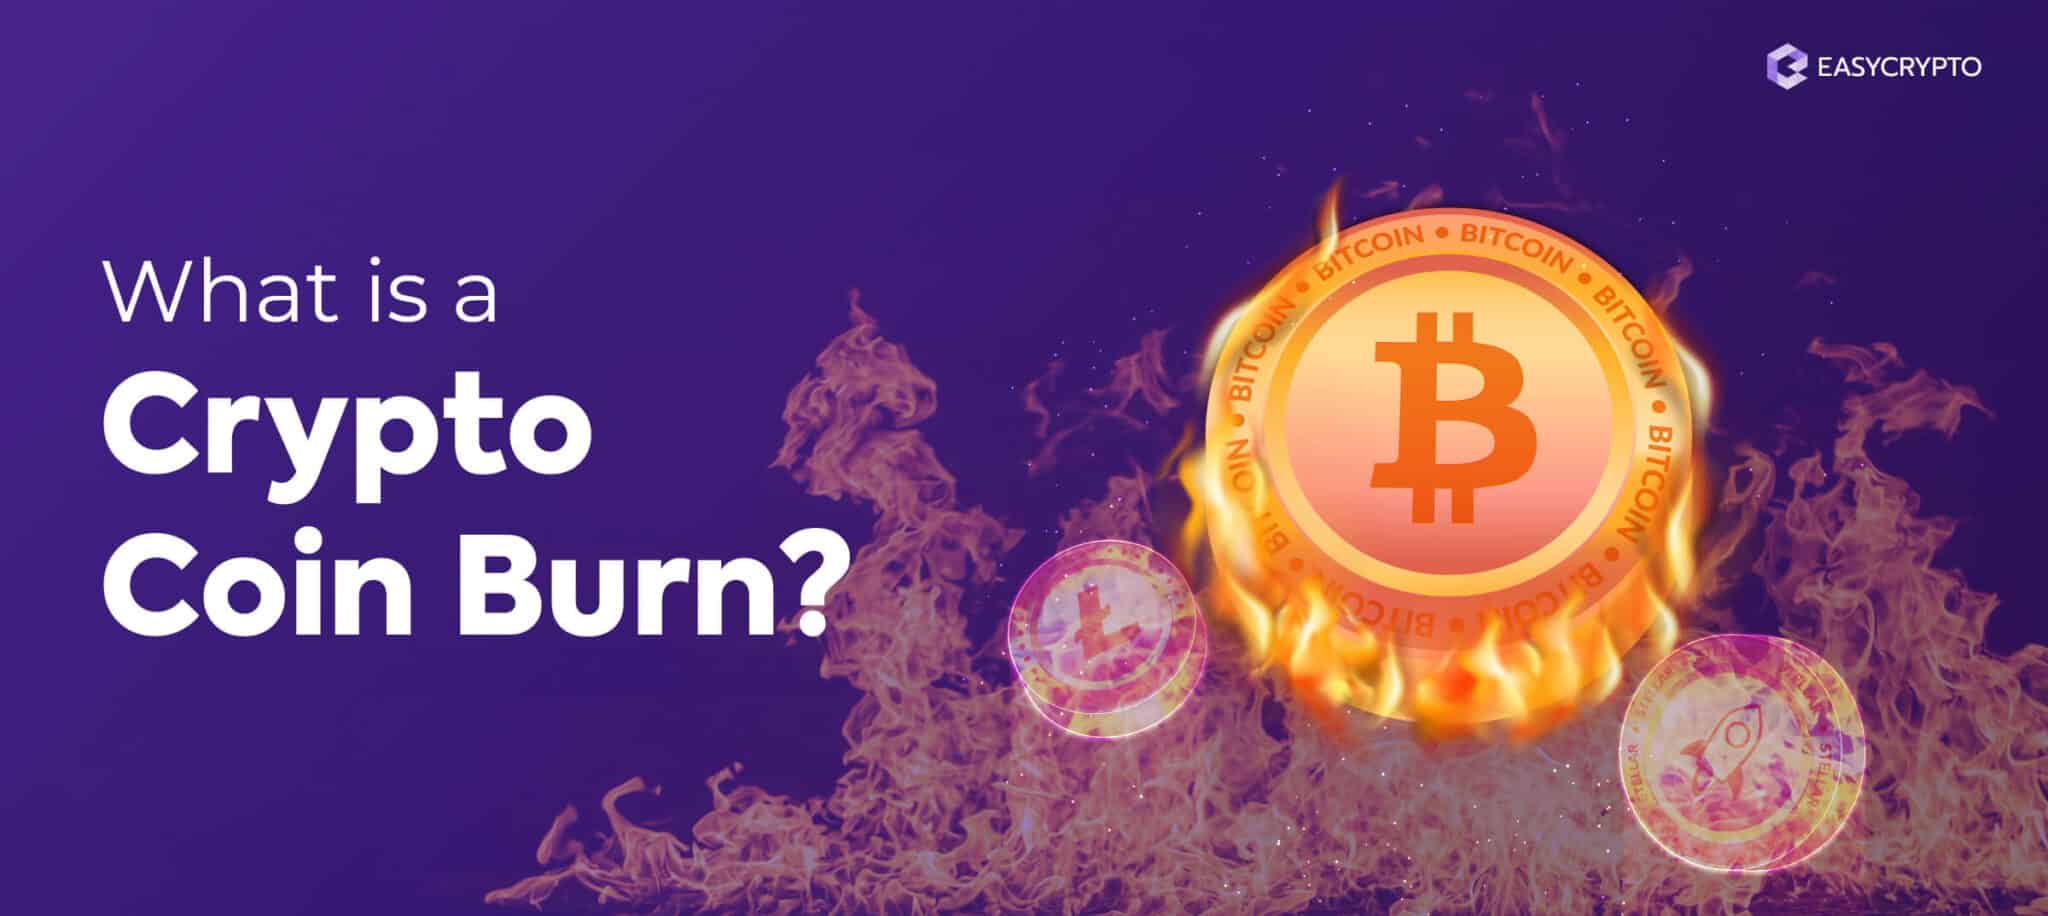 what is a crypto coin burn